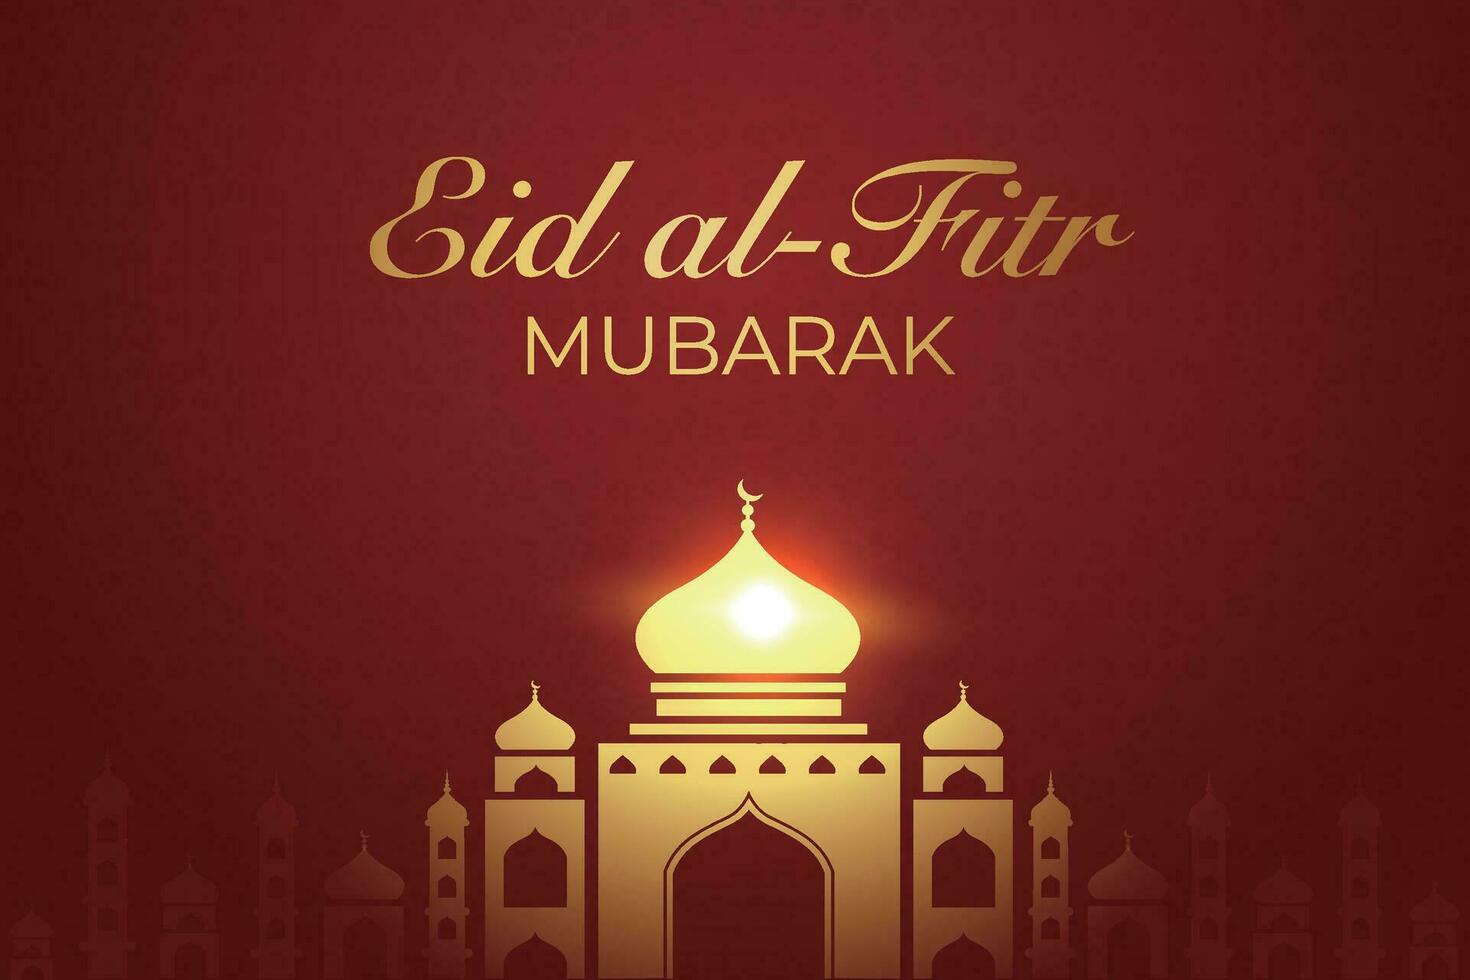 eid al-fitr mubarak greeting card with mosque and arabic text vector